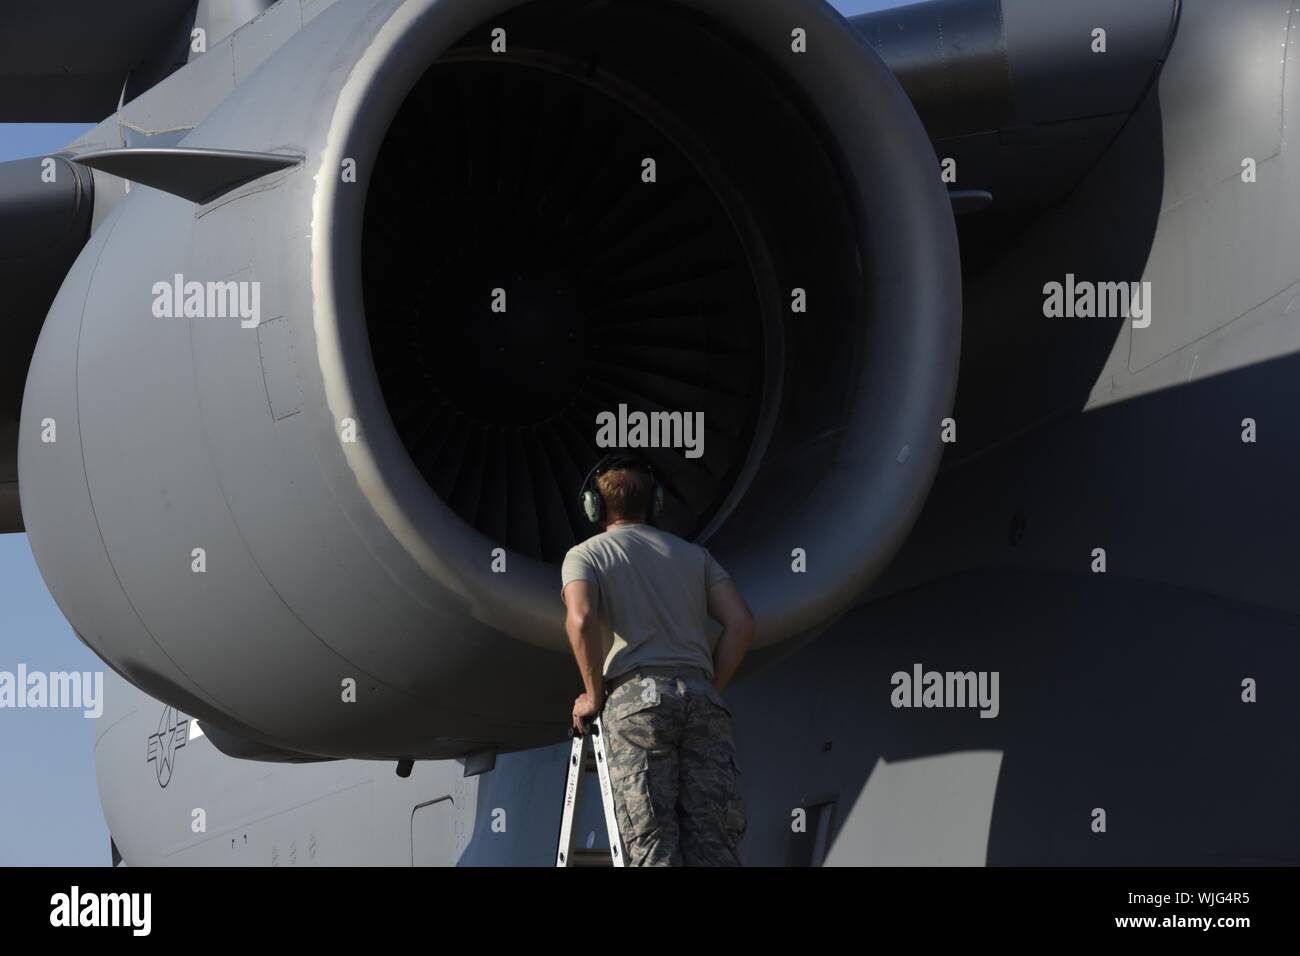 Members of the 145th Maintenance Group prepare the C-17 Globemaster III's to deploy in support of Hurricane Dorian relief in advance of the storms arrival, while at the North Carolina Air National Guard Base, Charlotte NC, 3 Sep. 2019, September 3, 2019. Hurricane Dorian is a Category three storm that caused severe damage to the Bahamas with a projection to hit North Carolina, each year the 145th Airlift Wing responds and prepares for any hurricane in the event of stateside landfall. Image courtesy Airman 1st Class Juan Paz/145th Airlift Wing, Public Affairs North Carolina Air National Guard.  Stock Photo